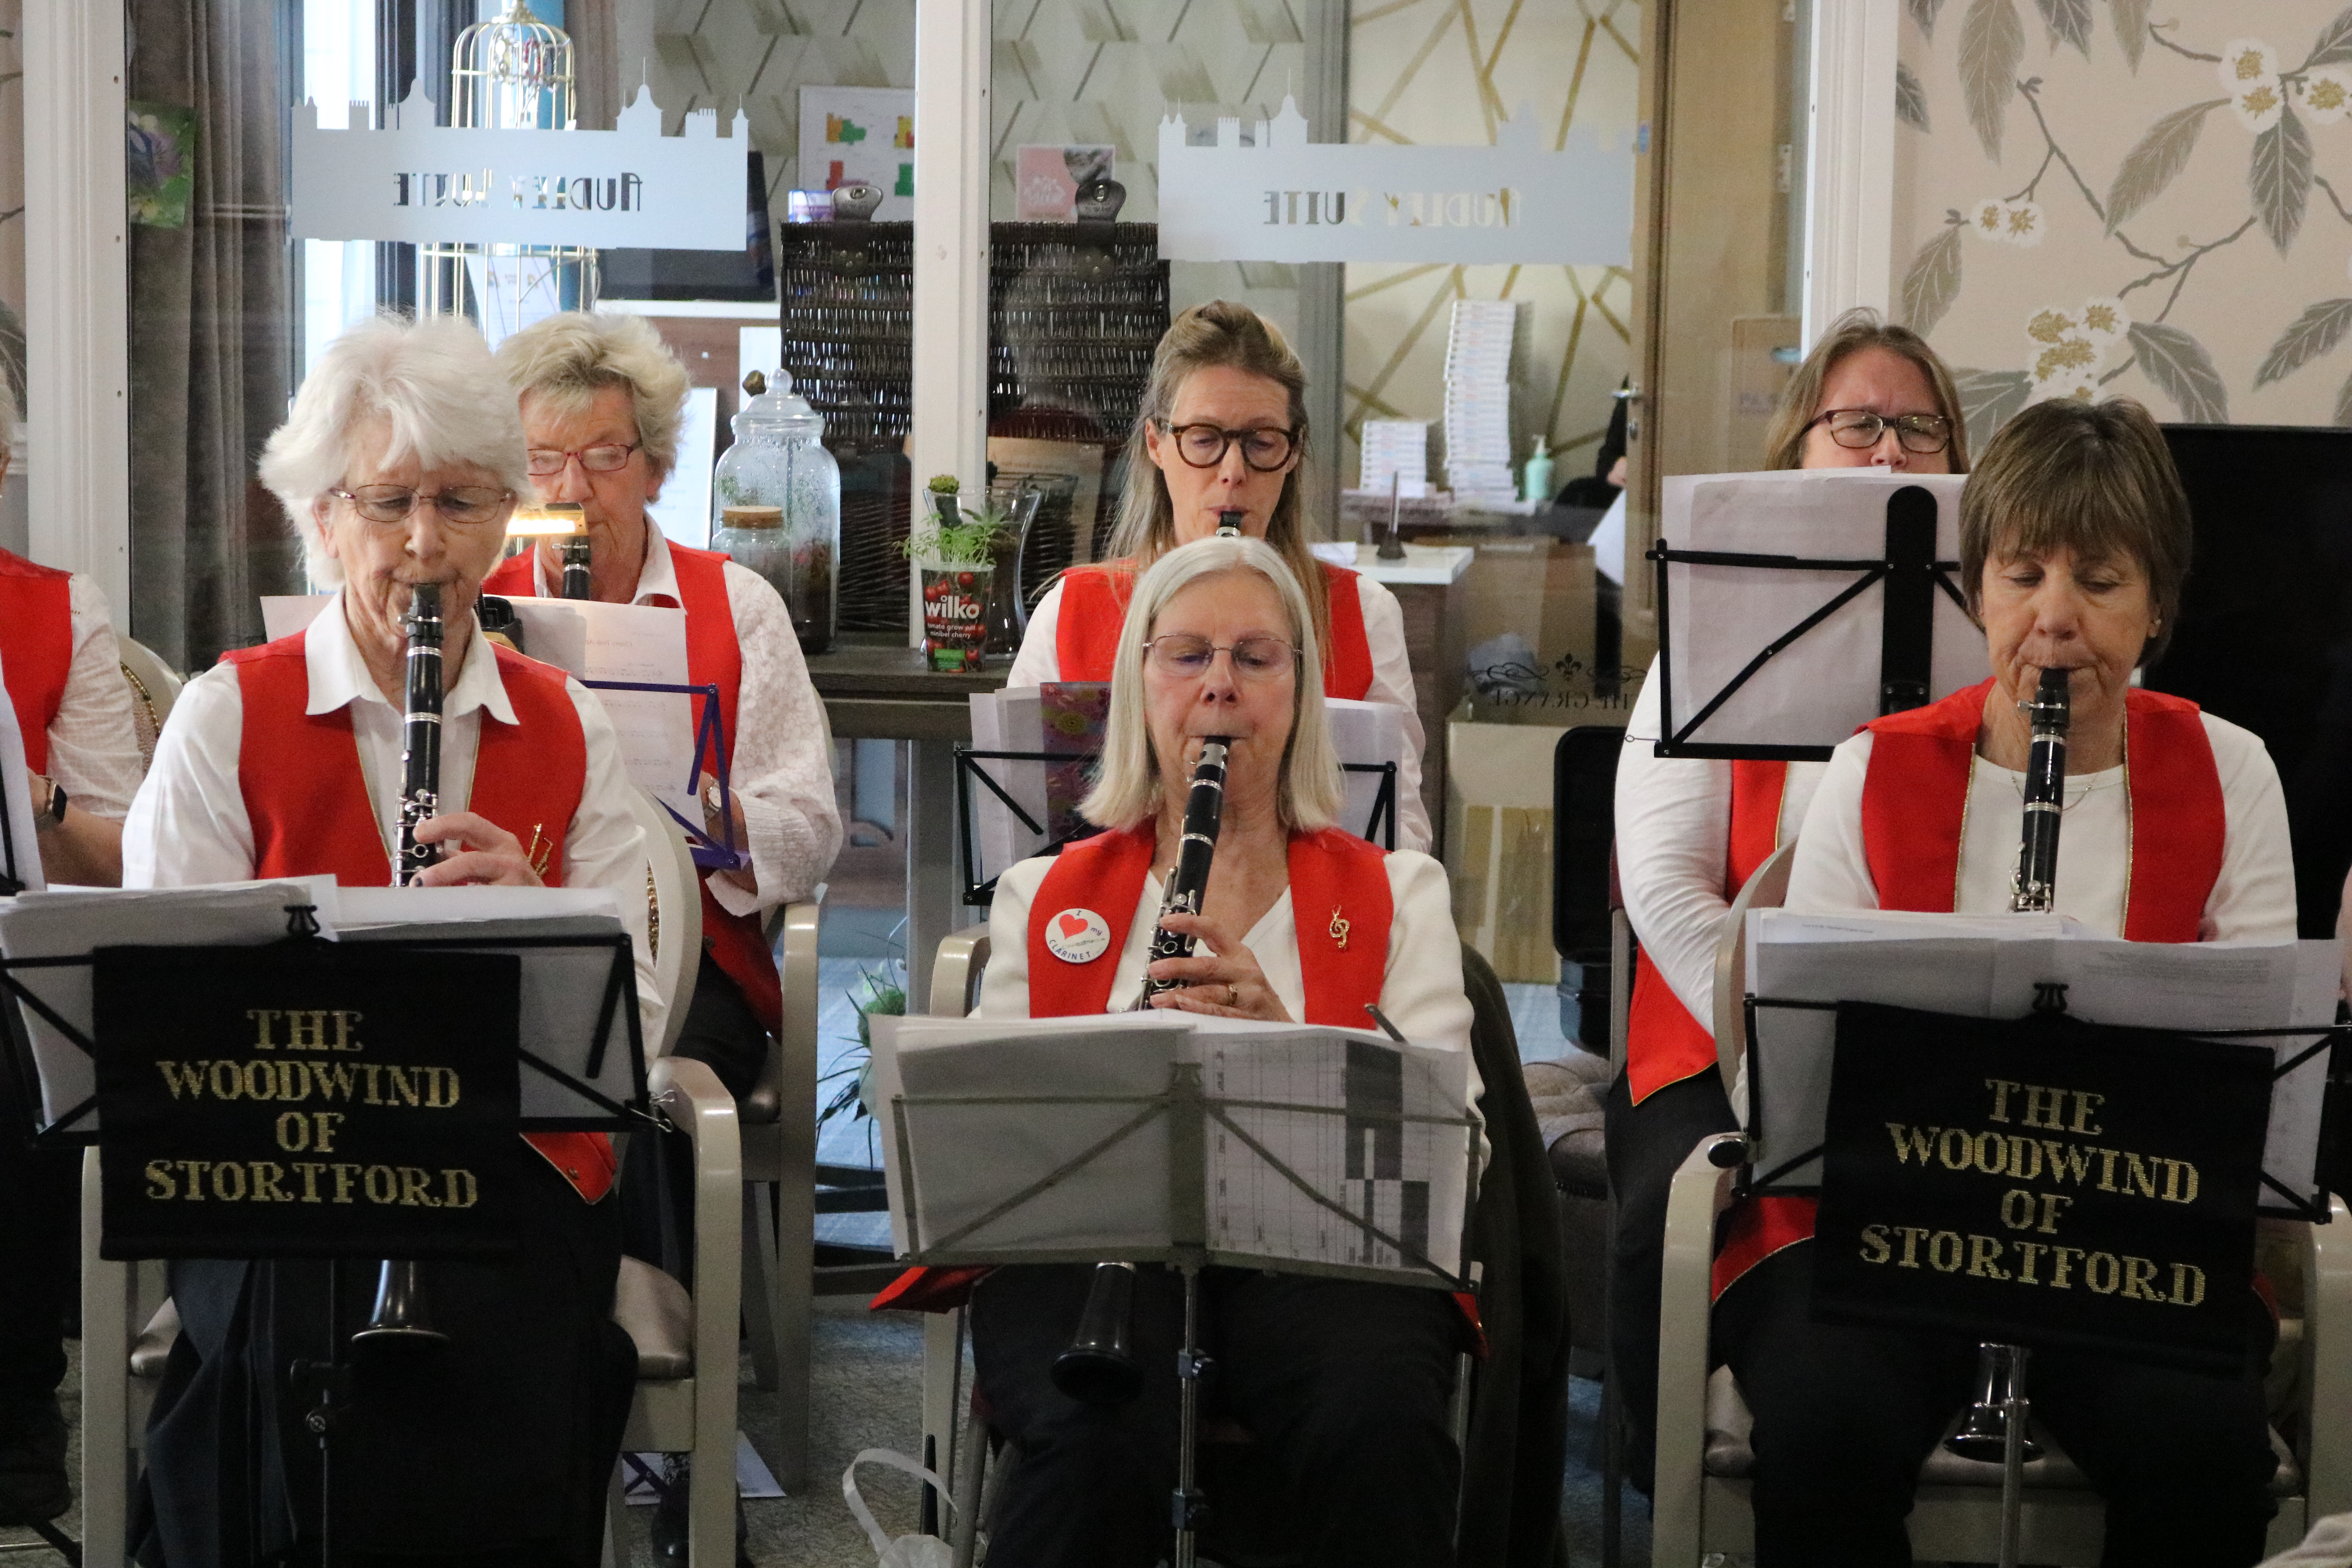 The Woodwind of Stortford Group